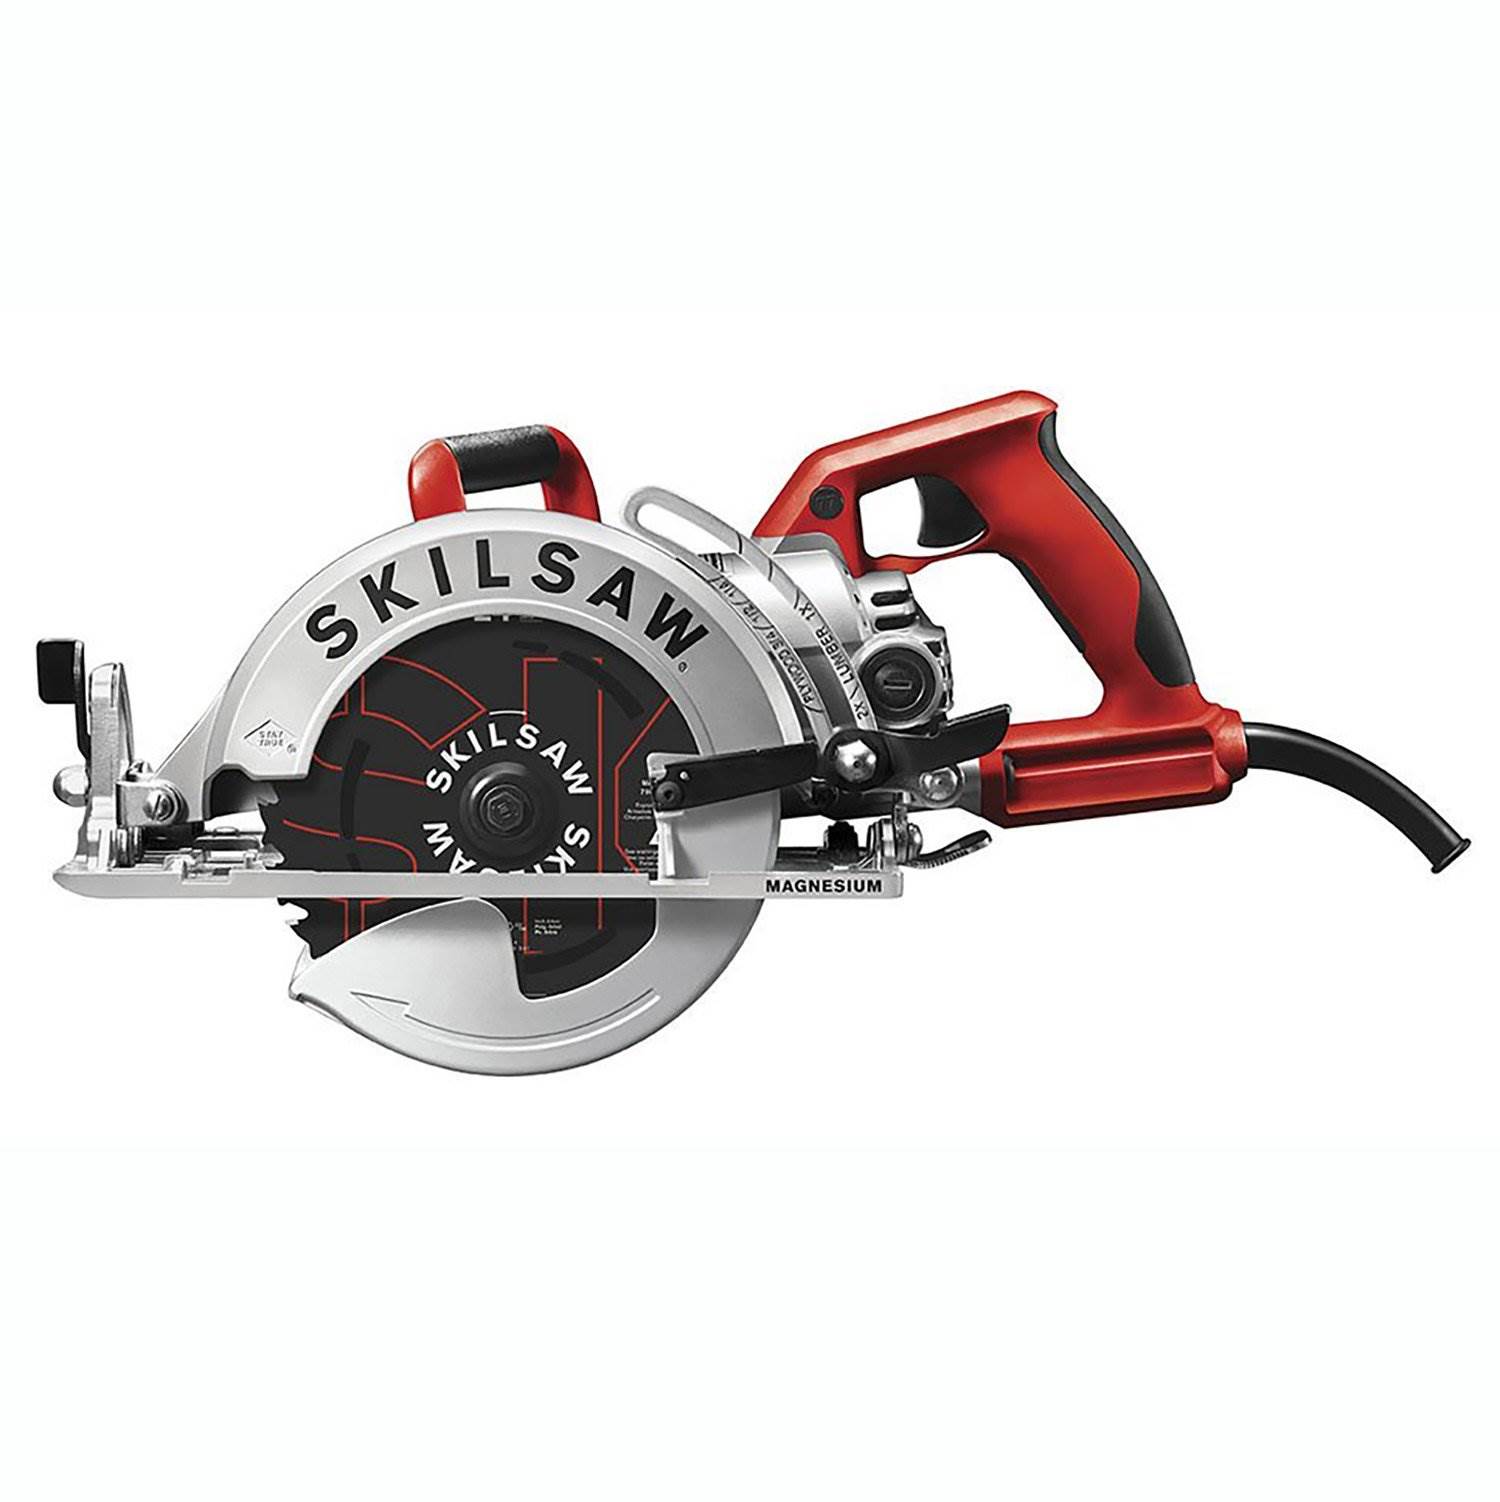 SKIL SPT77WML-01 7-1/4" Lightweight 15Amp Corded Magnesium Worm Drive Circular Saw - image 2 of 7